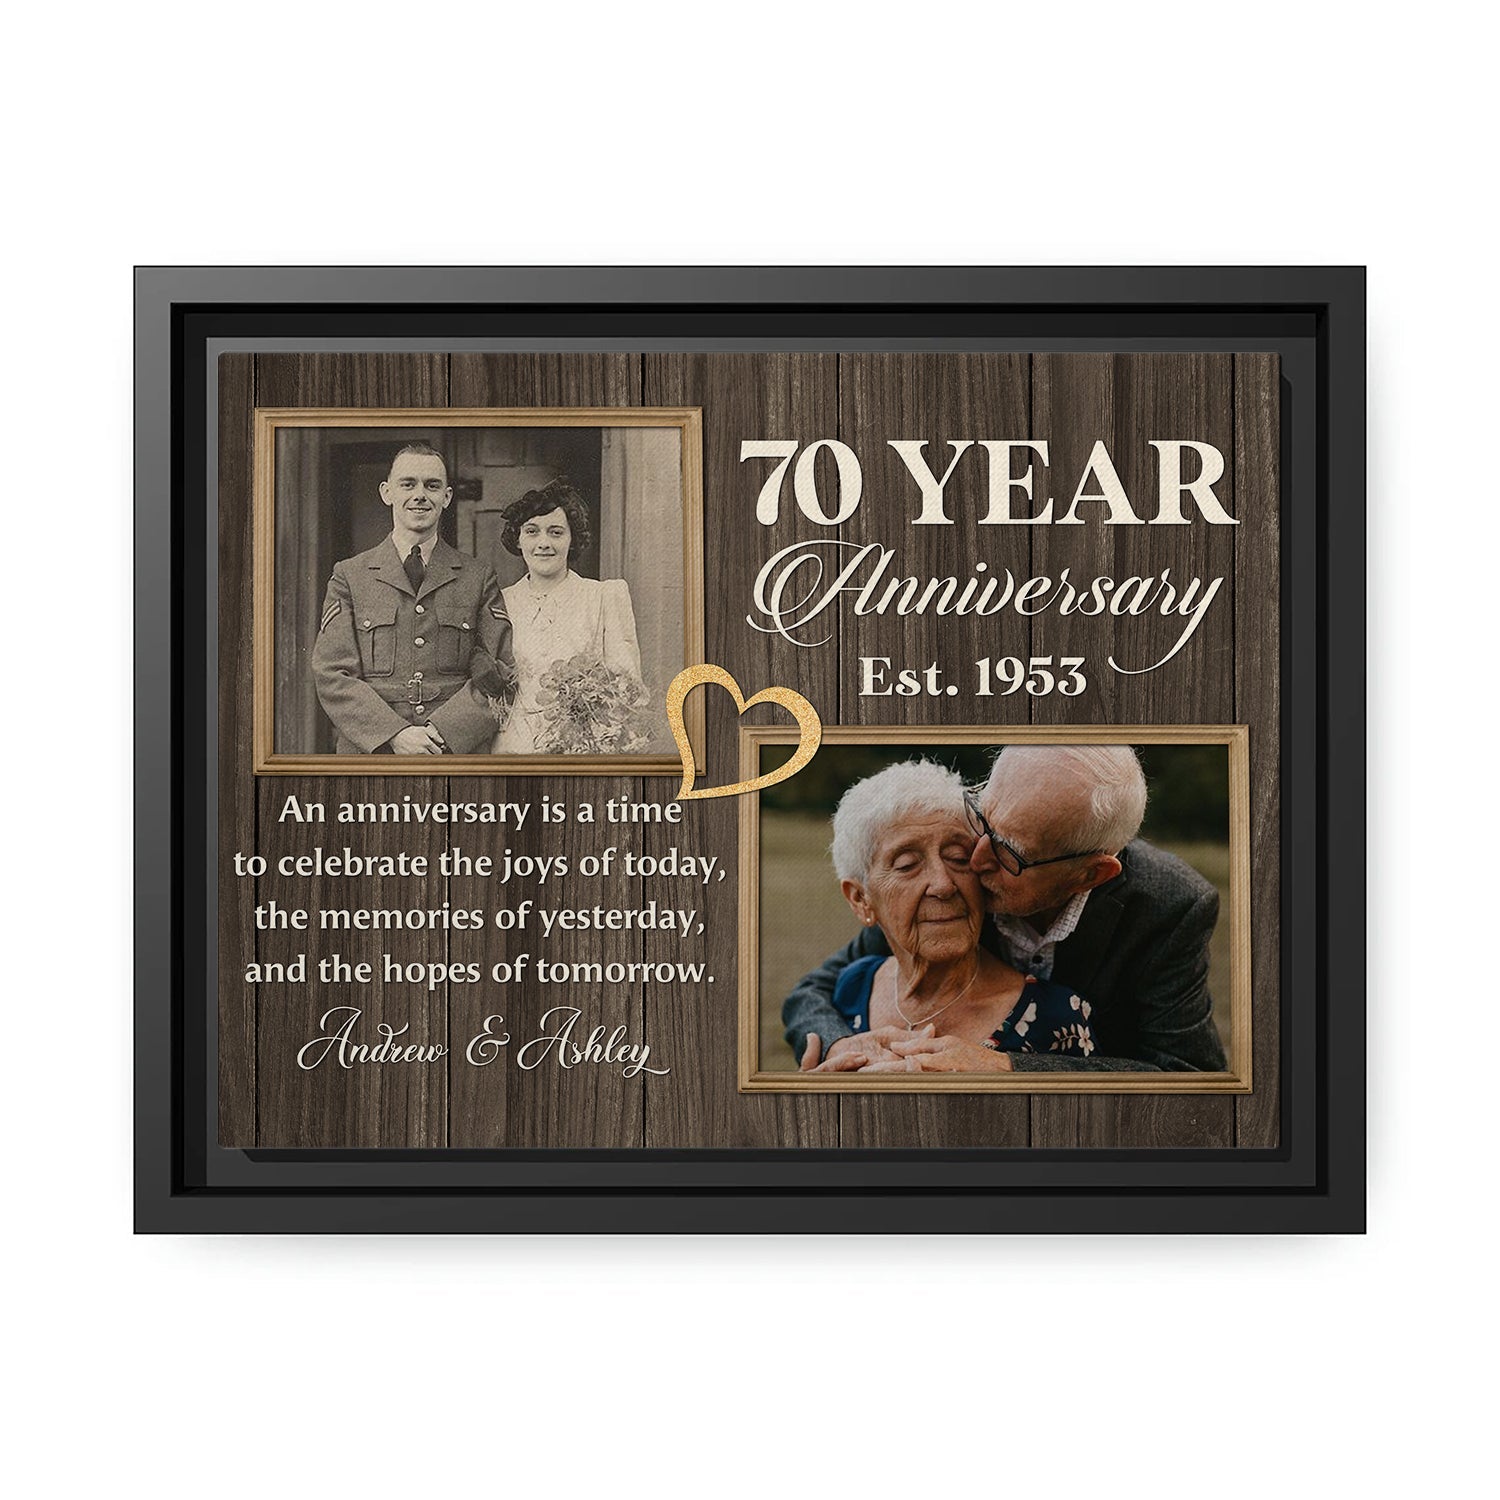 70 Year Anniversary - Personalized 70 Year Anniversary gift for Parents, Husband or Wife - Custom Canvas Print - MyMindfulGifts